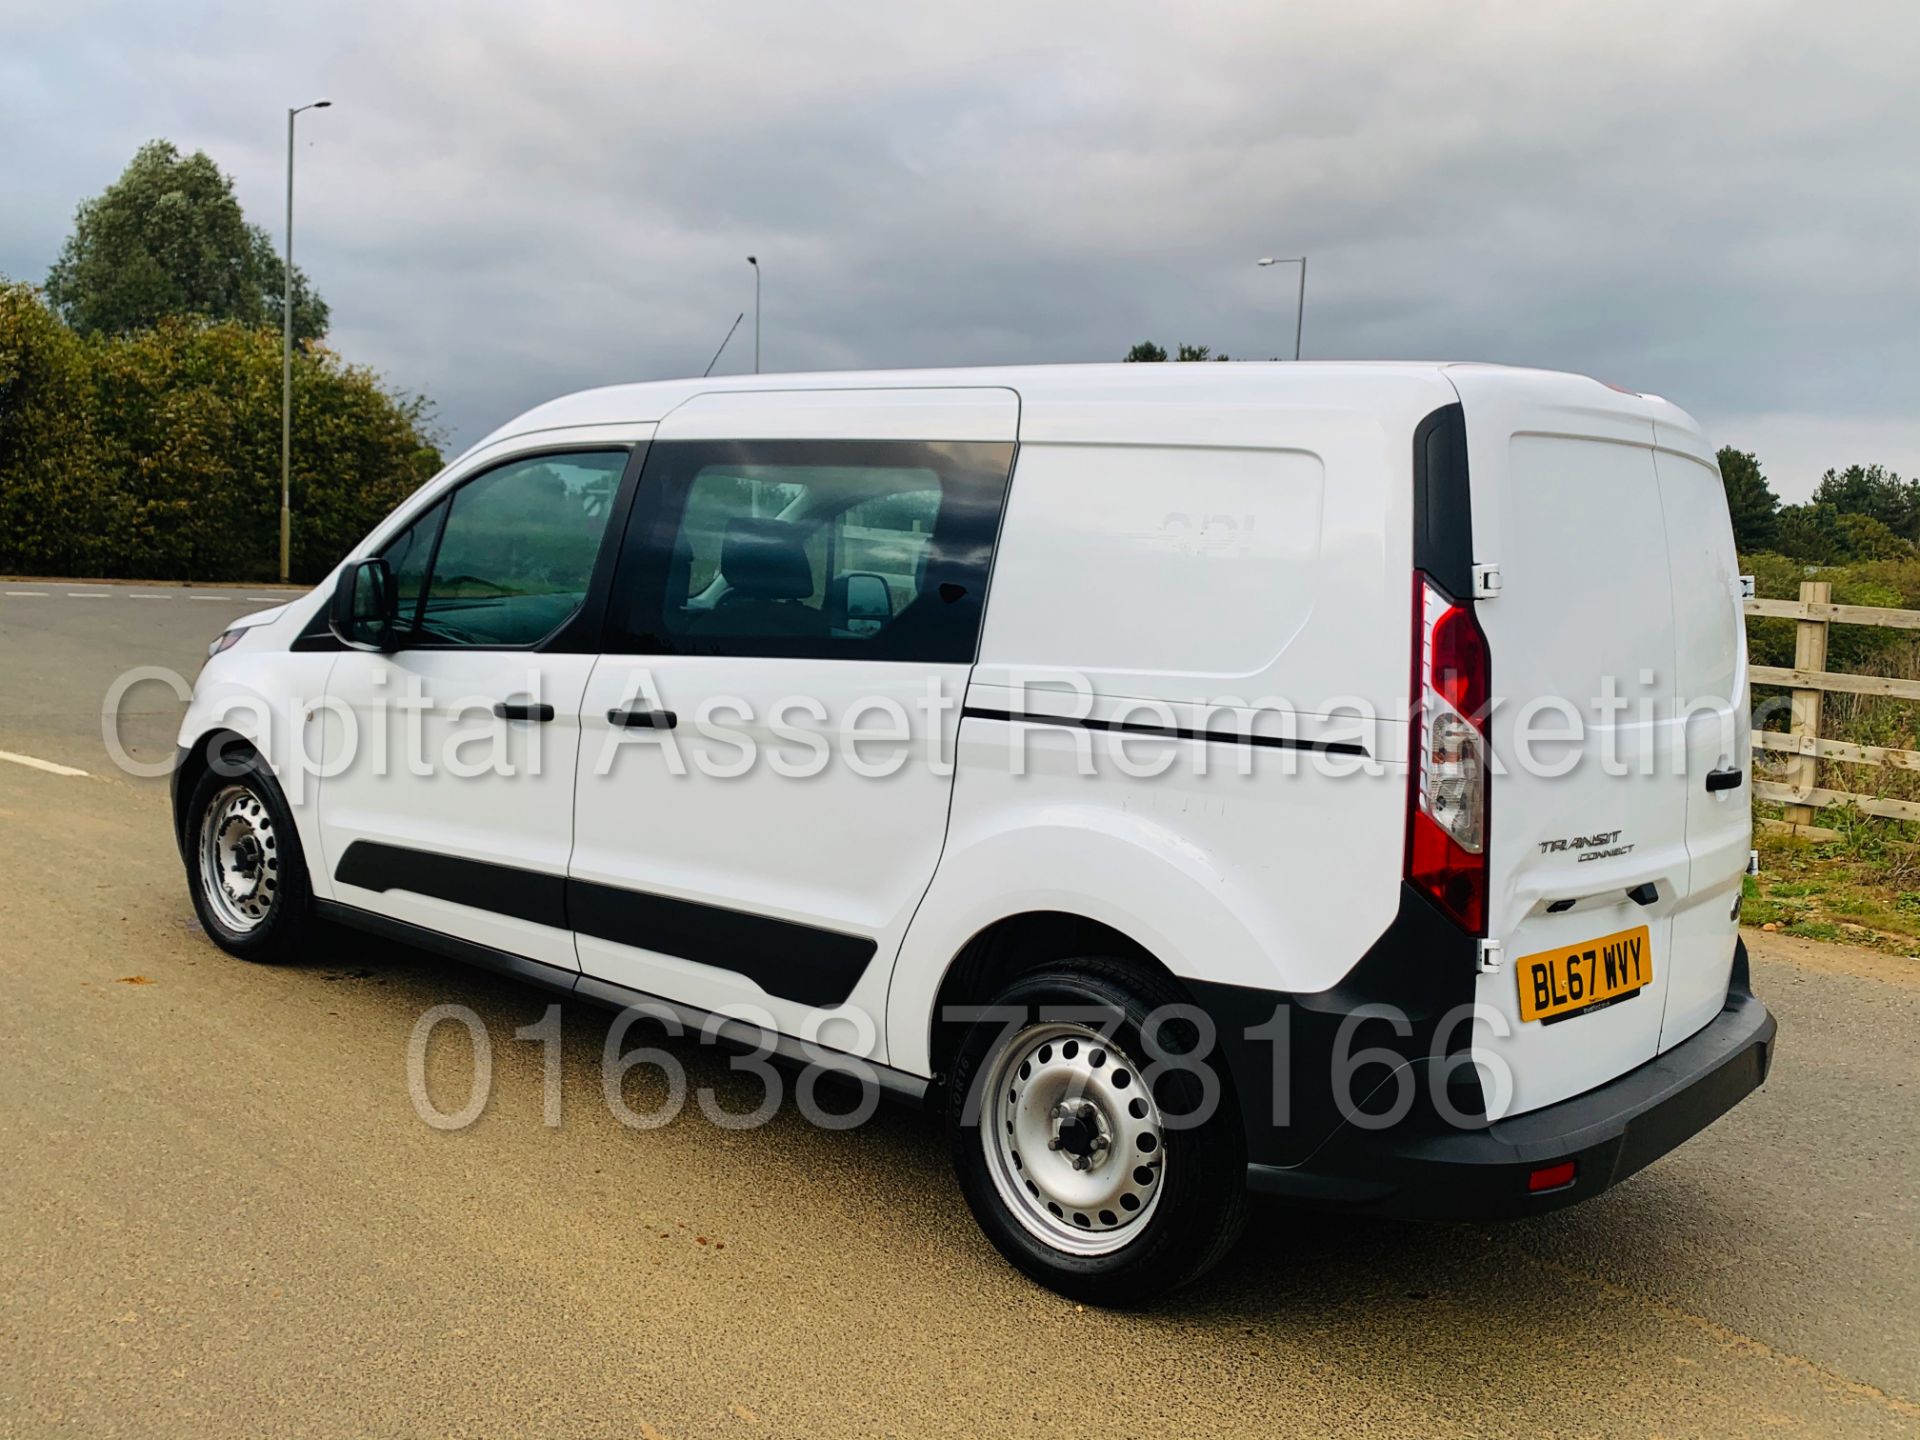 ON SALE FORD TRANSIT CONNECT *LWB- 5 SEATER CREW VAN* (2018 - EURO 6) 1.5 TDCI *AIR CON* (1 OWNER) - Image 9 of 45